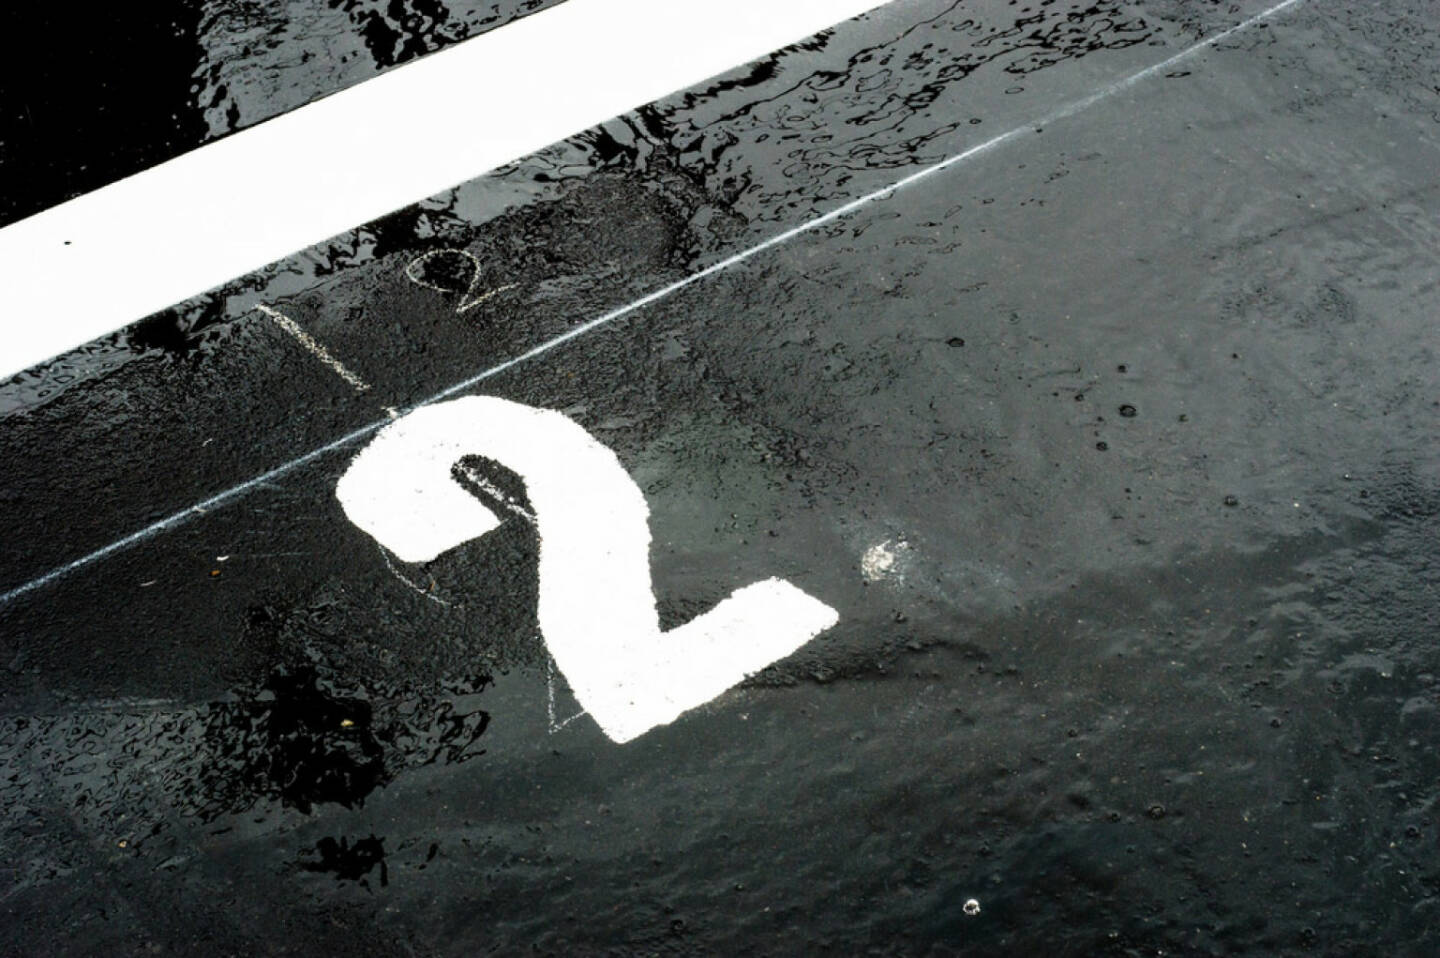 2, Zwei, http://www.shutterstock.com/de/pic-142824058/stock-photo-the-number-printed-on-the-wet-road-closeup.html 